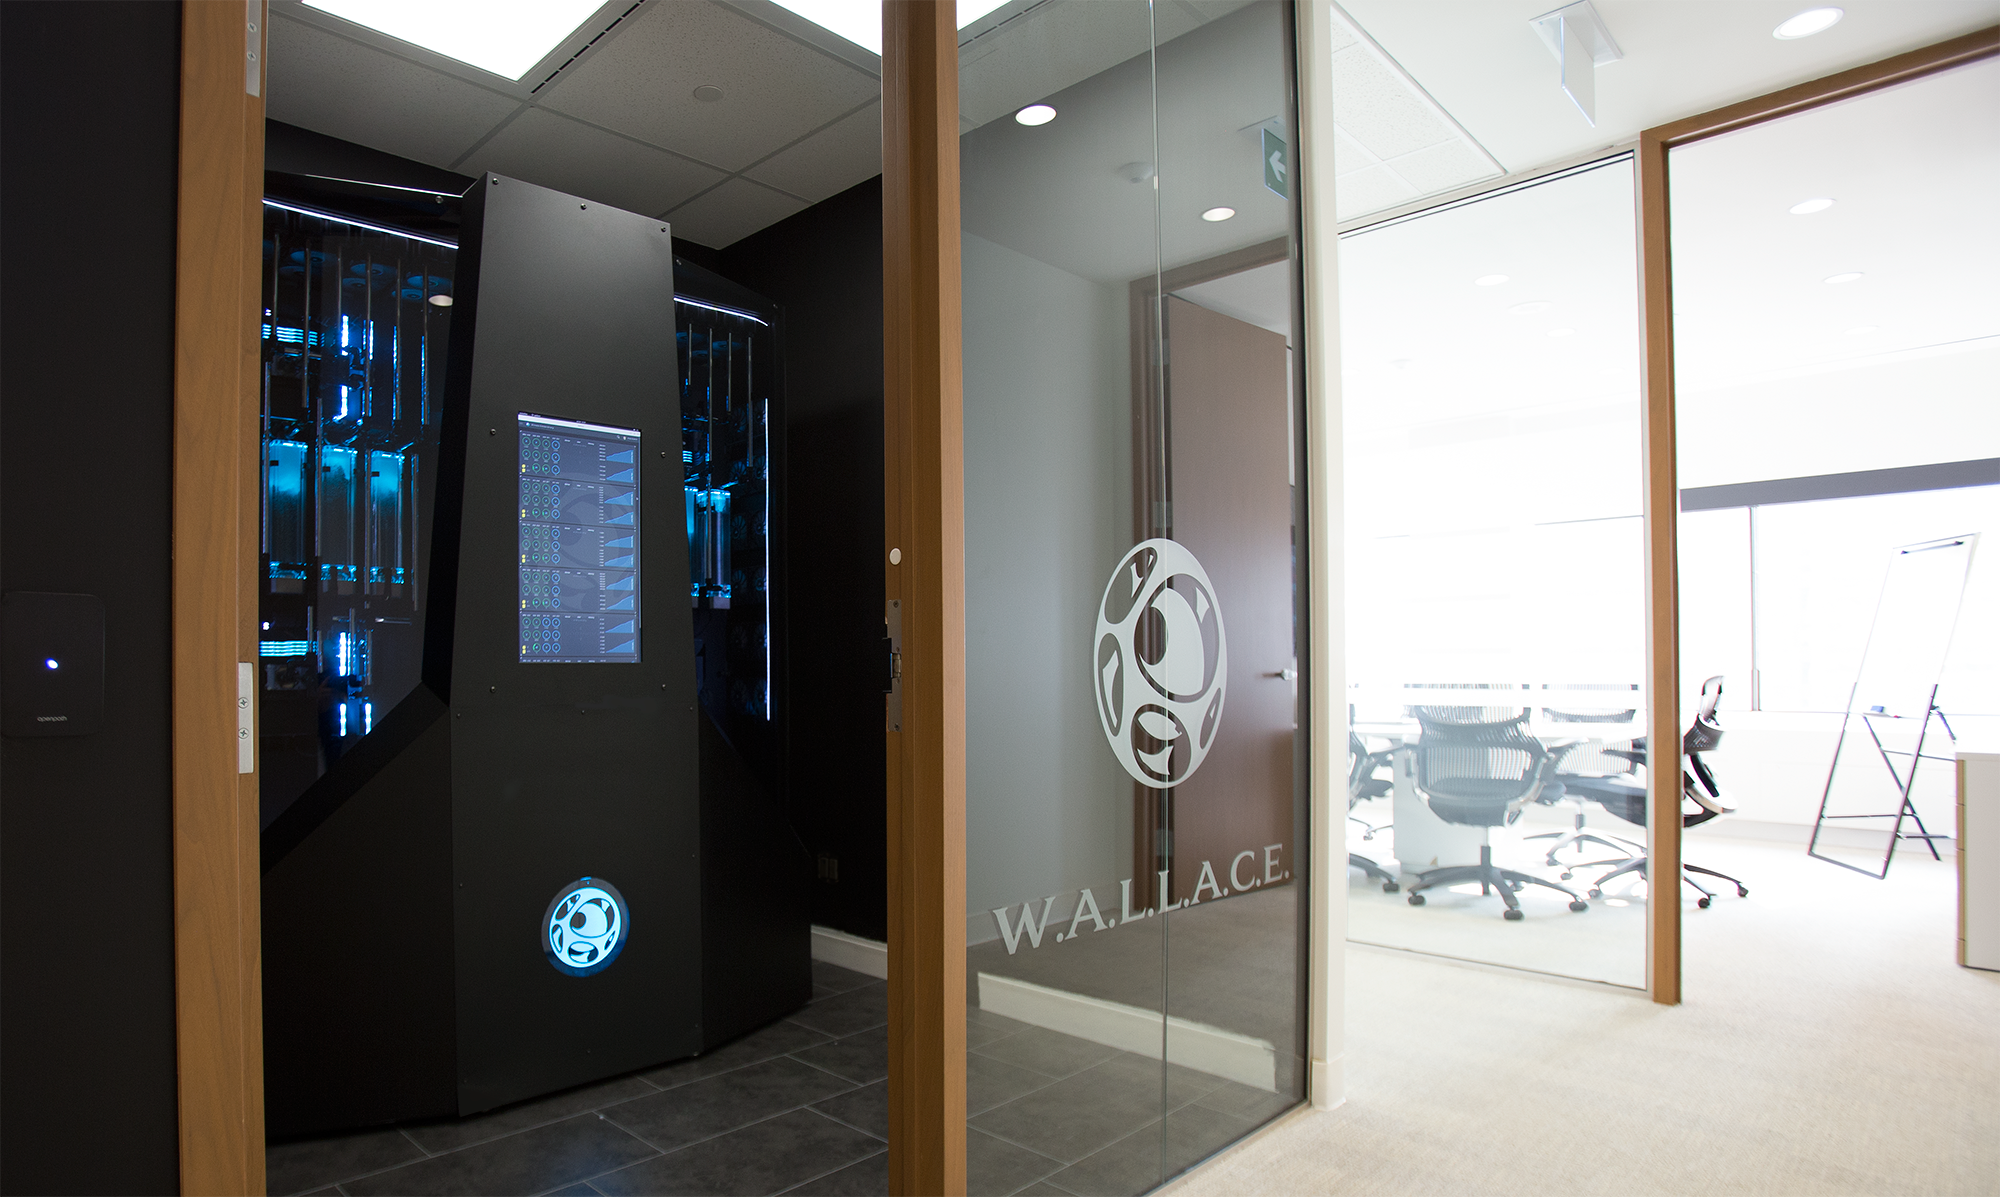 WALLACE is a 2m tall, 1.5m-wide supercomputer.